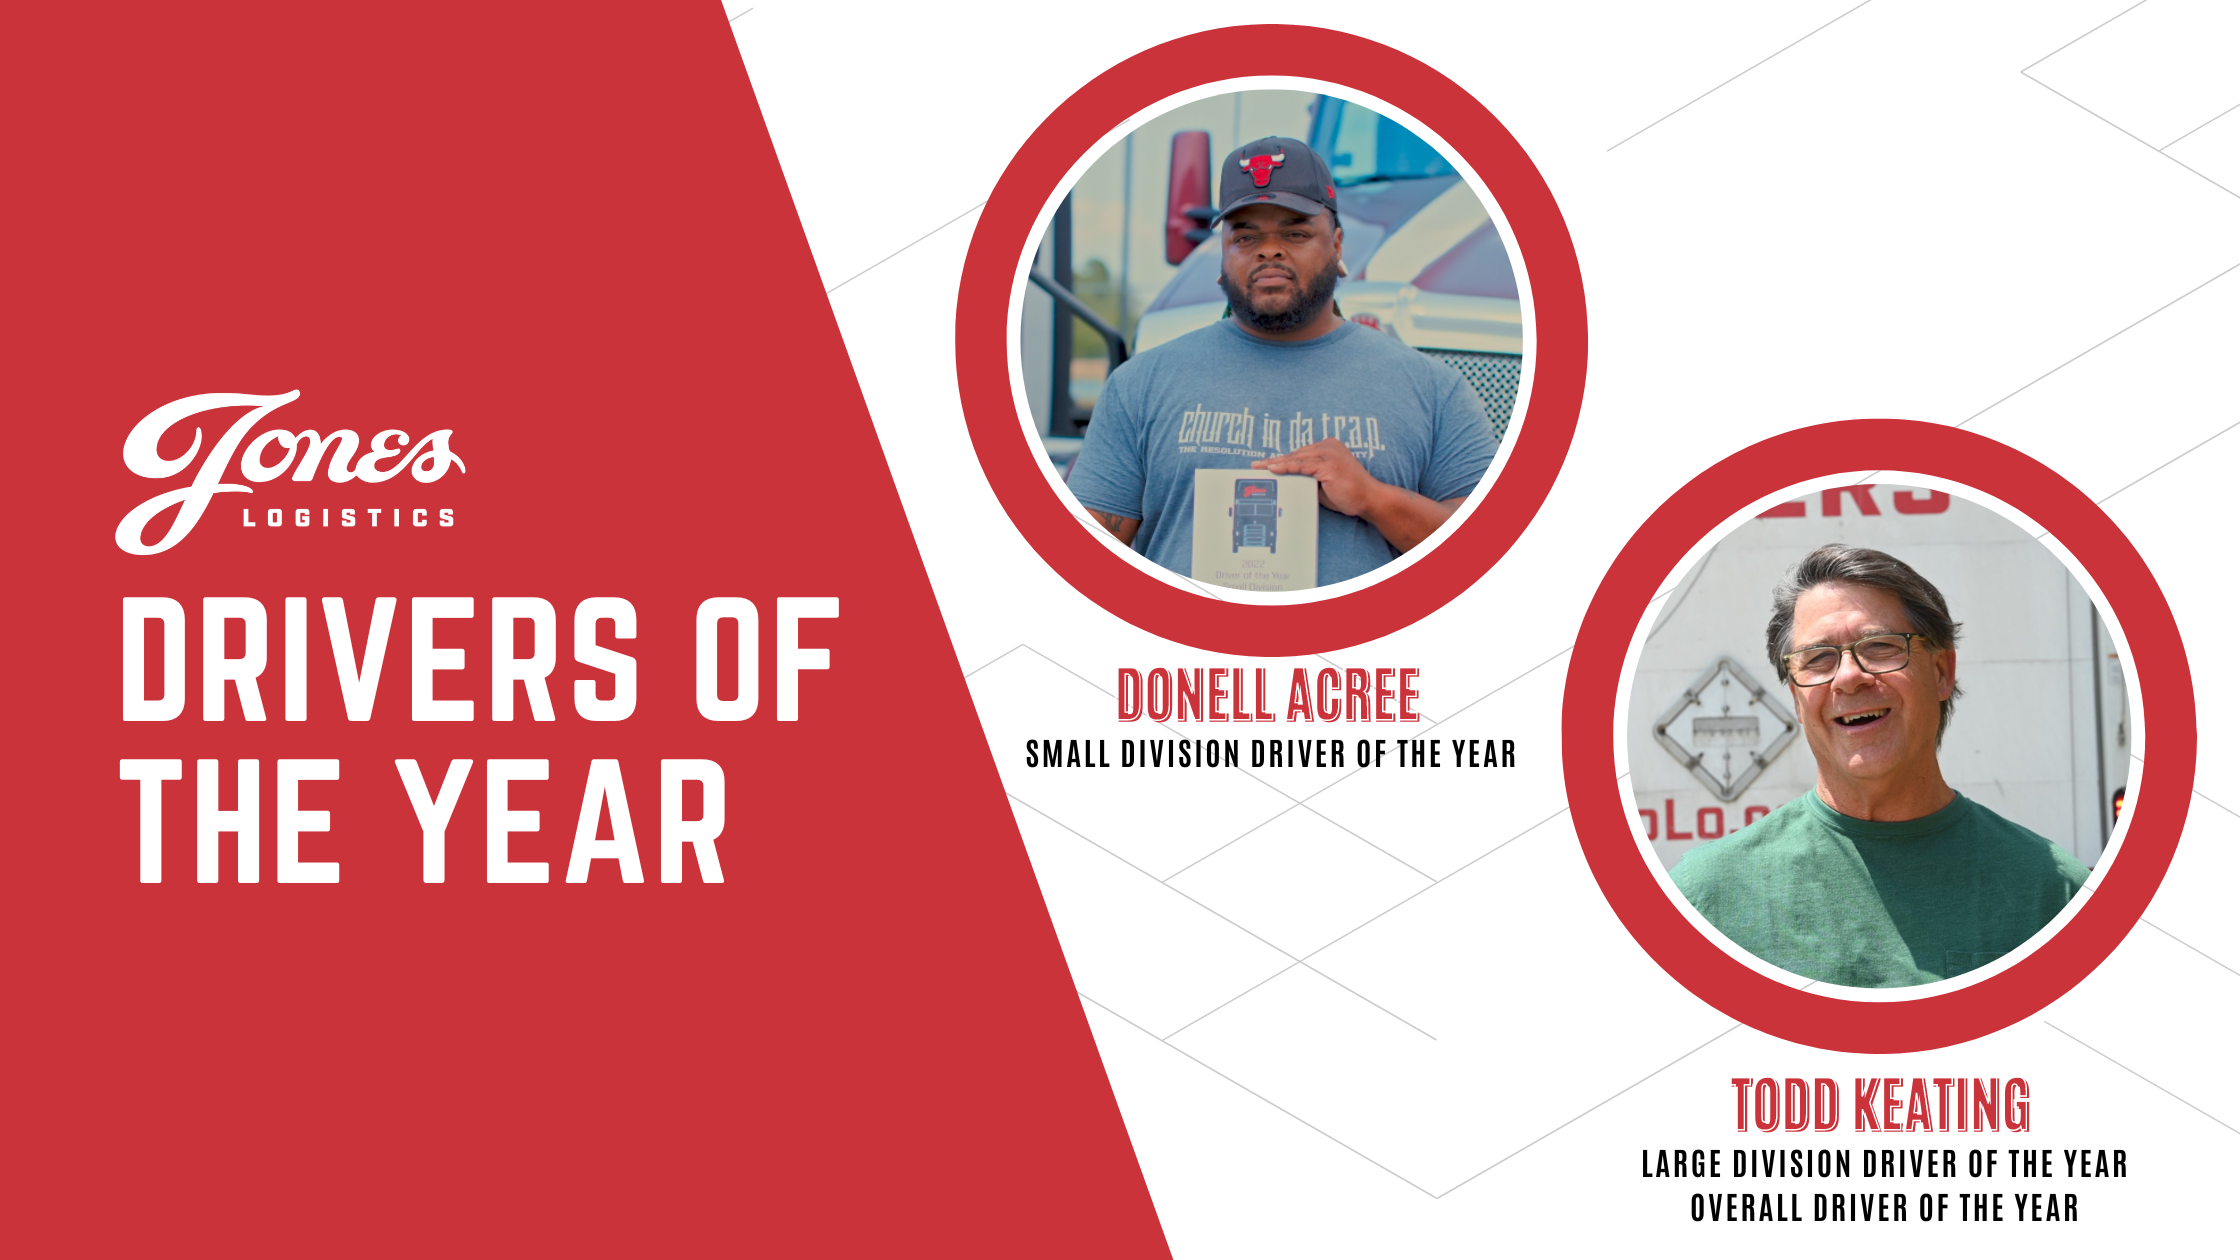 2022 Jones Logistics Drivers of the Year - Donell Acree and Todd Keating